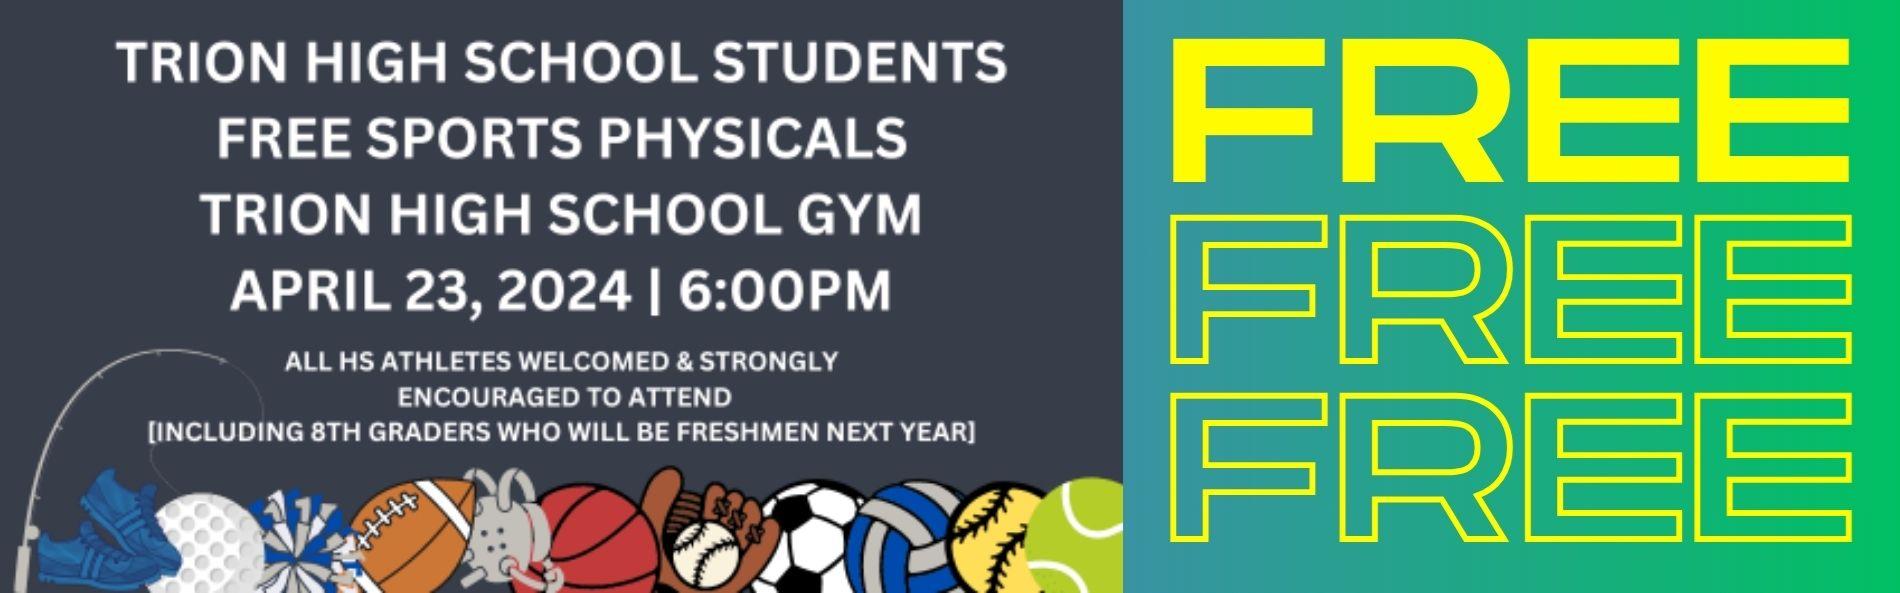 RISING 9TH GRADERS - CURRENT JUNIORS: COME APRIL 23RD AT 6PM TO THE THS GYM FOR YOUR FREE SPORTS PHYSICAL